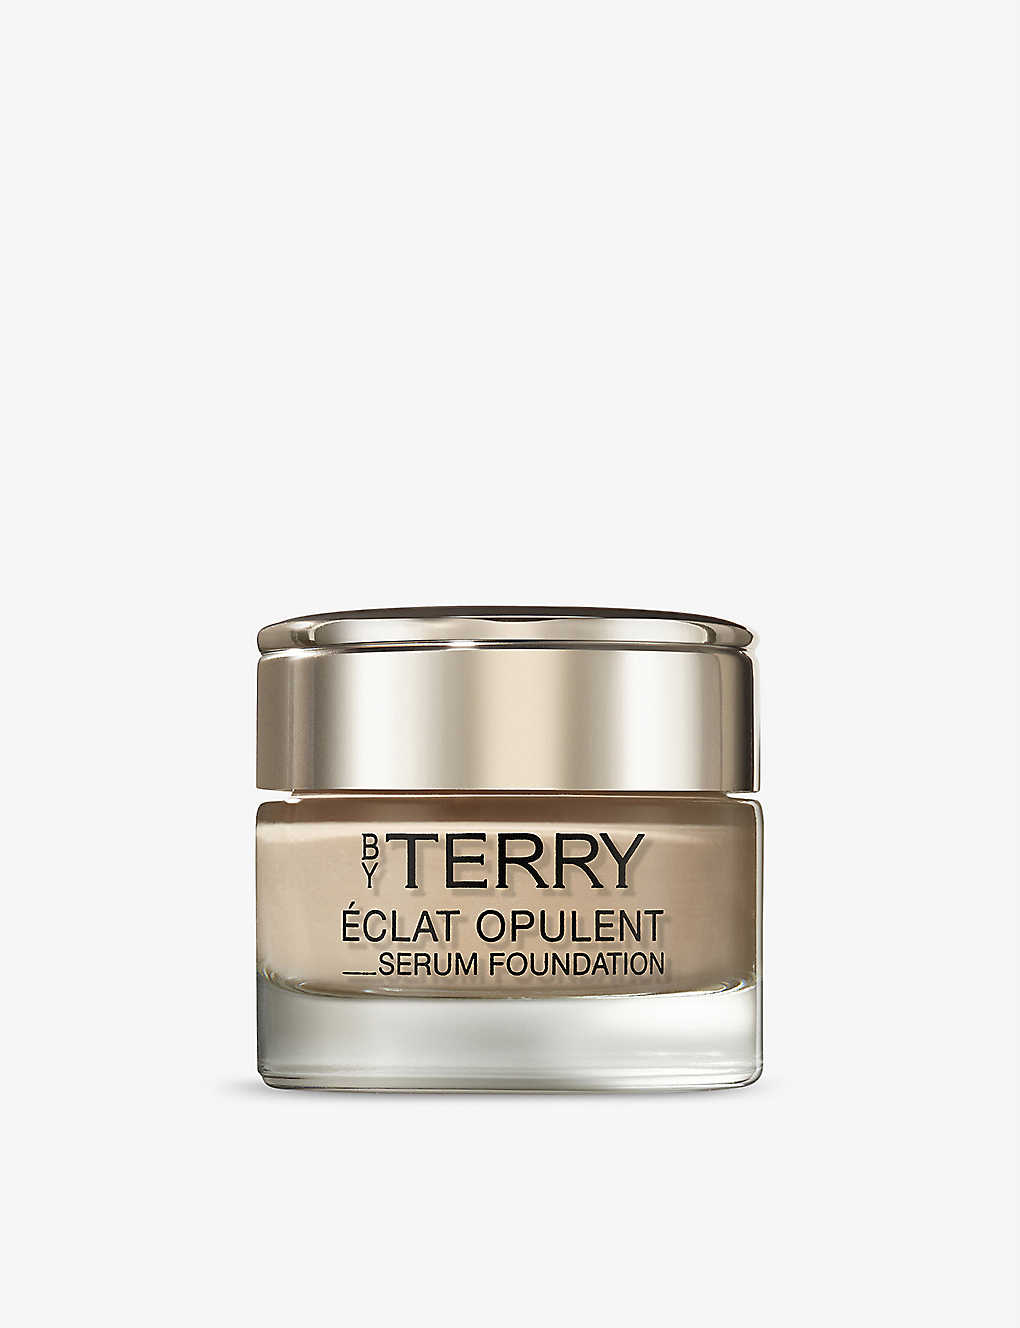 By Terry Éclat Opulent Serum Foundation 30ml In N3 Latte